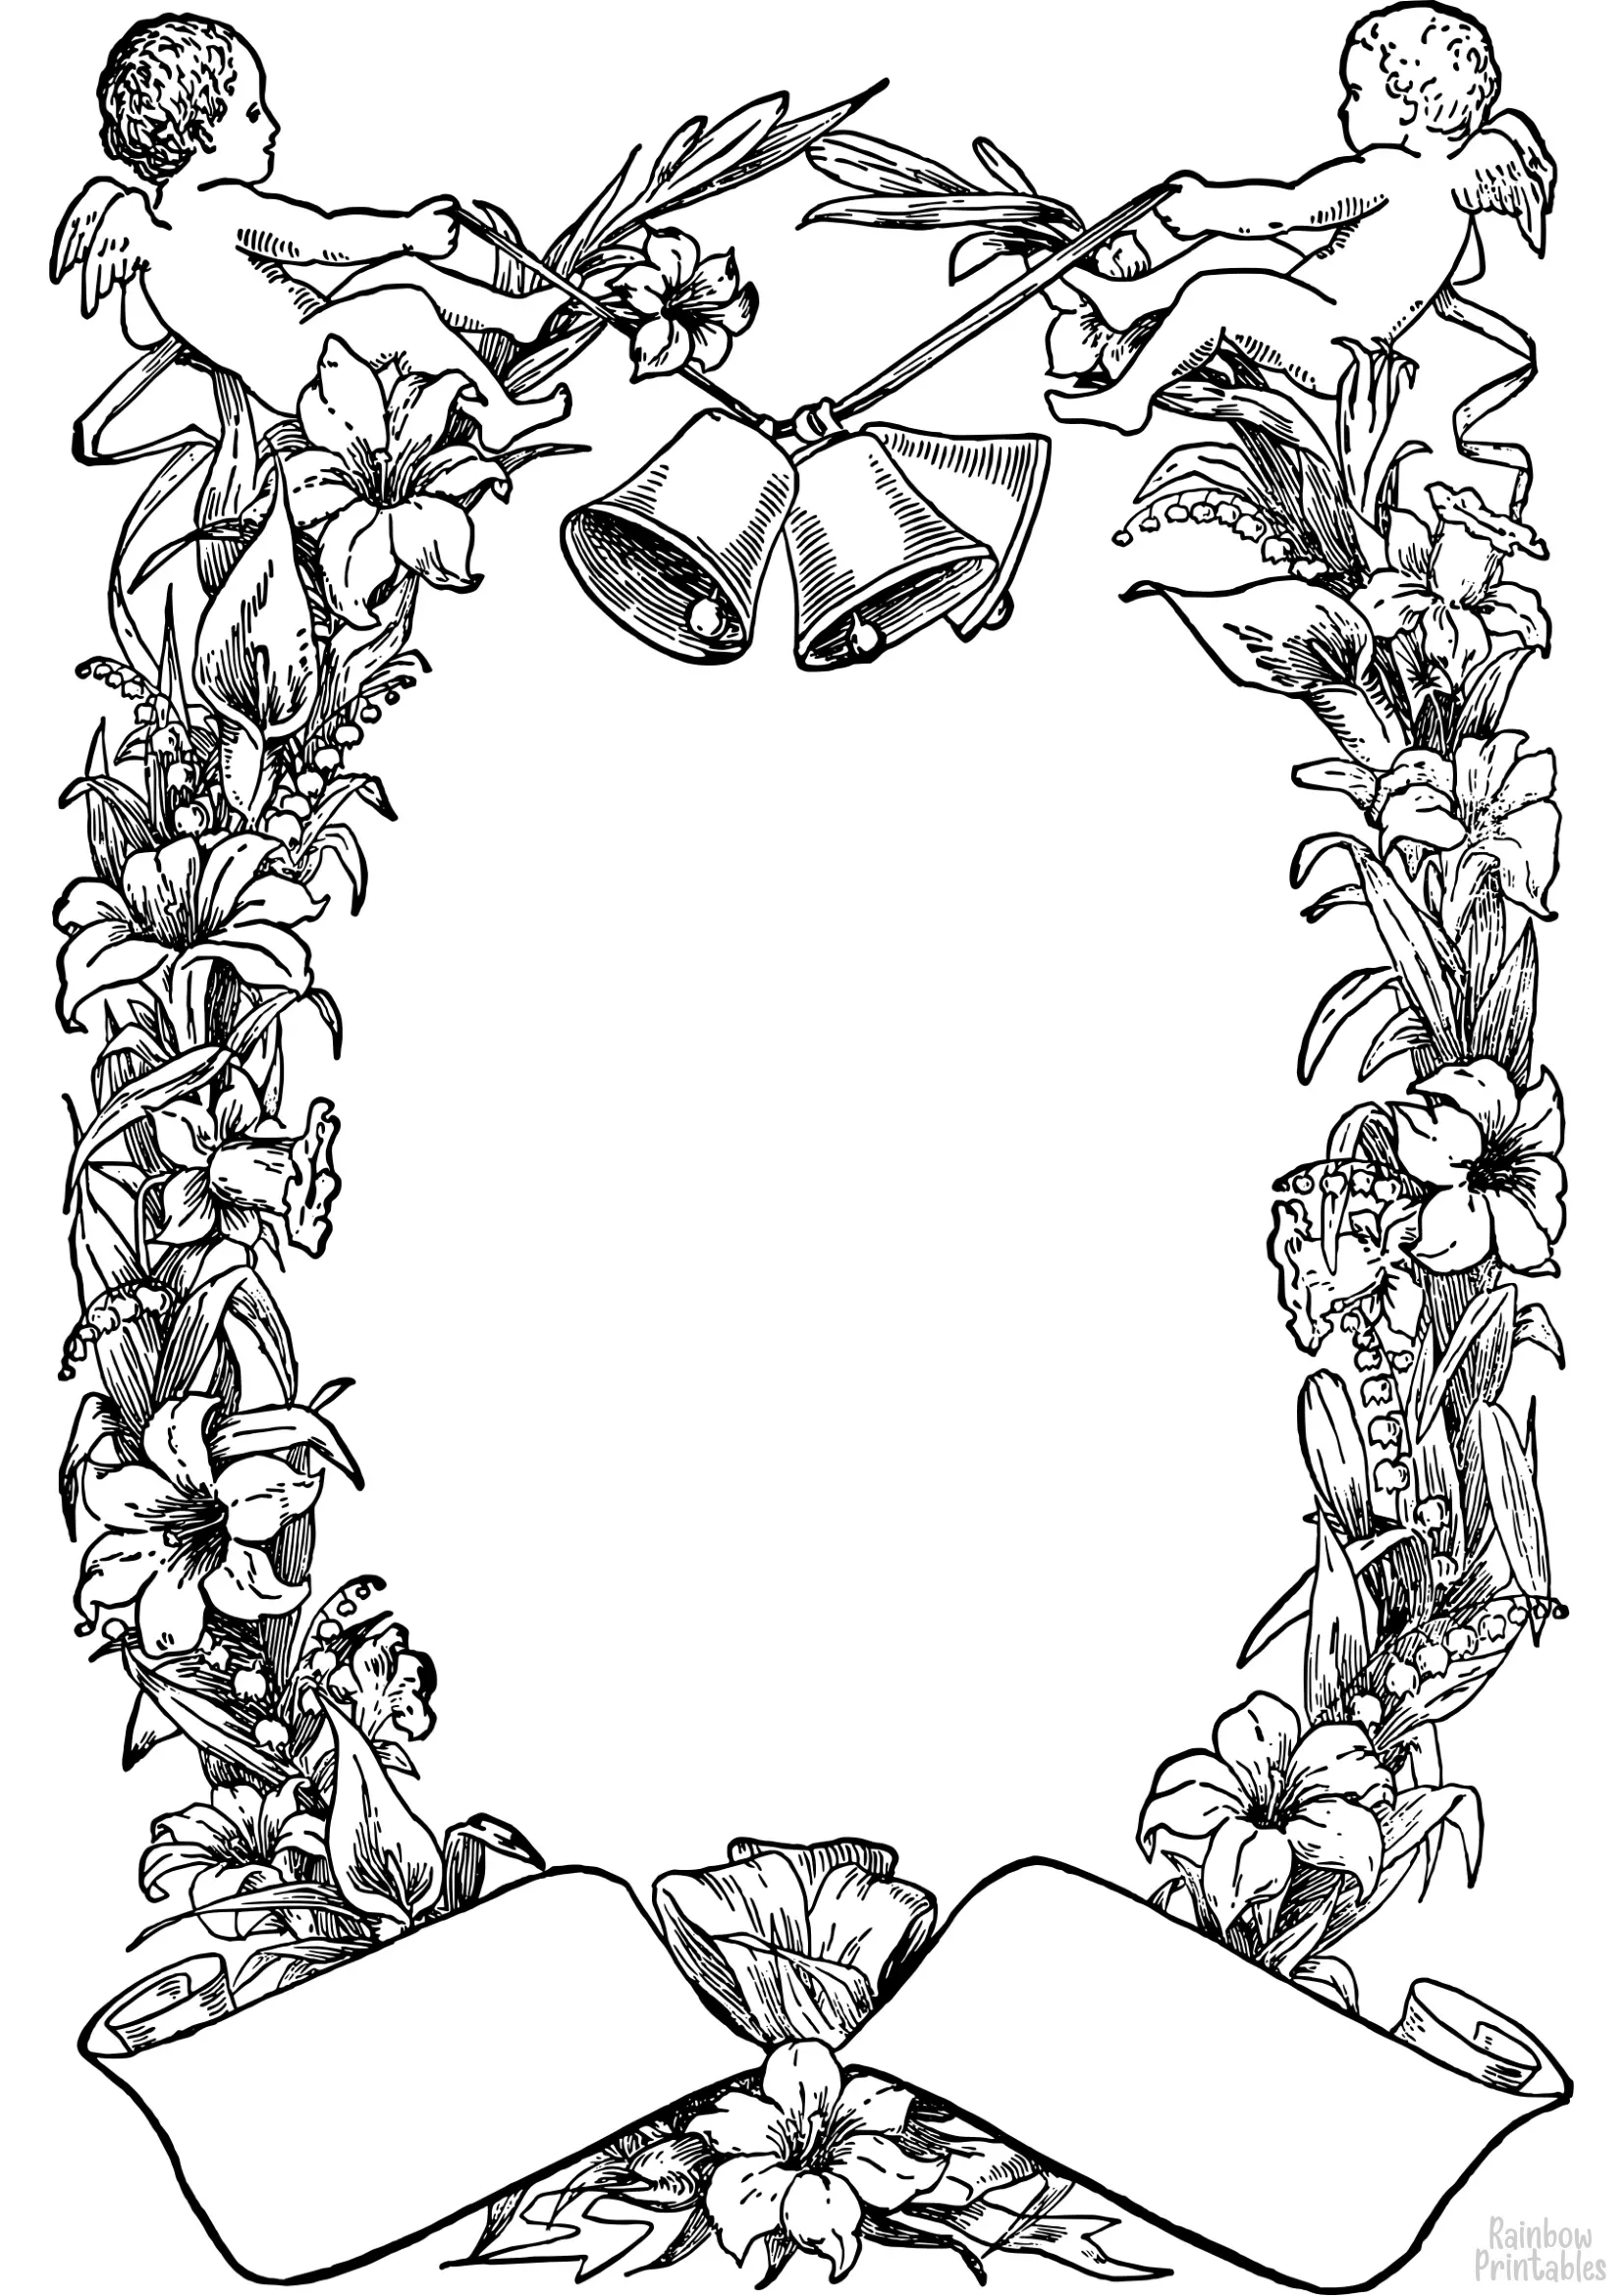 angels-and-bells-border-paper-craft-Free Clipart Coloring Pages for Kids Adults Art Activities Line Art